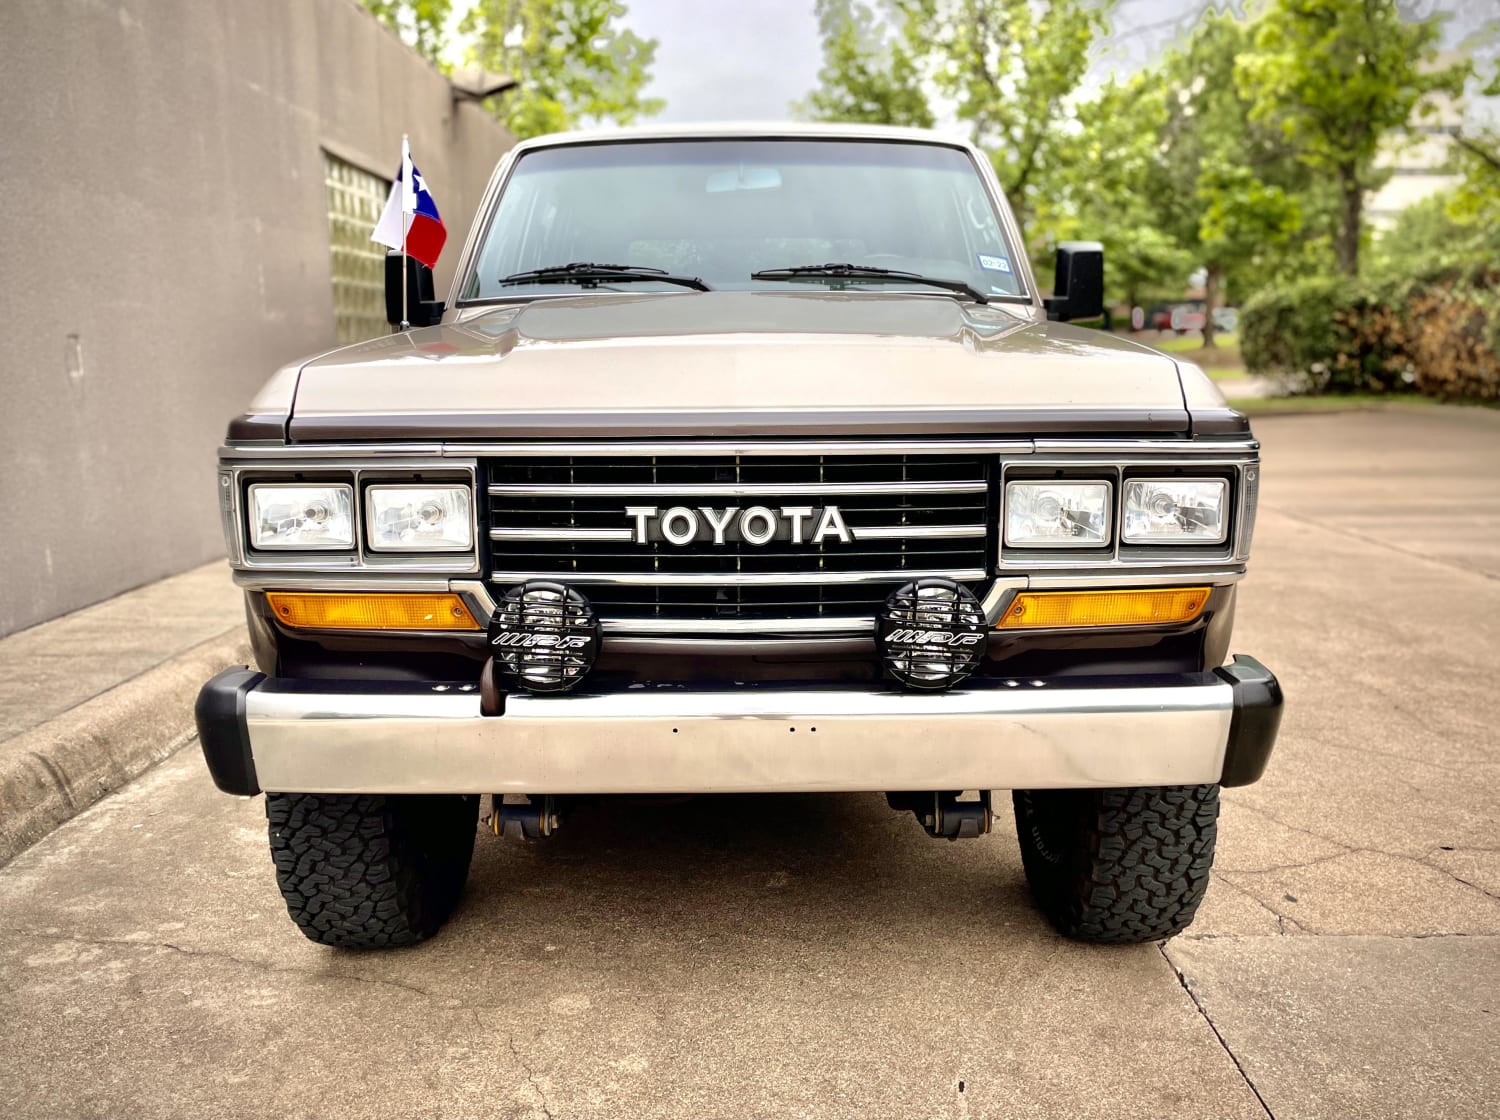 Frontend Friday Homies! FJ62 in pic iFP 100watt and Hella kit. OME 2.5 and working antenna with badass Texas flag. Fort Worth, Texas.